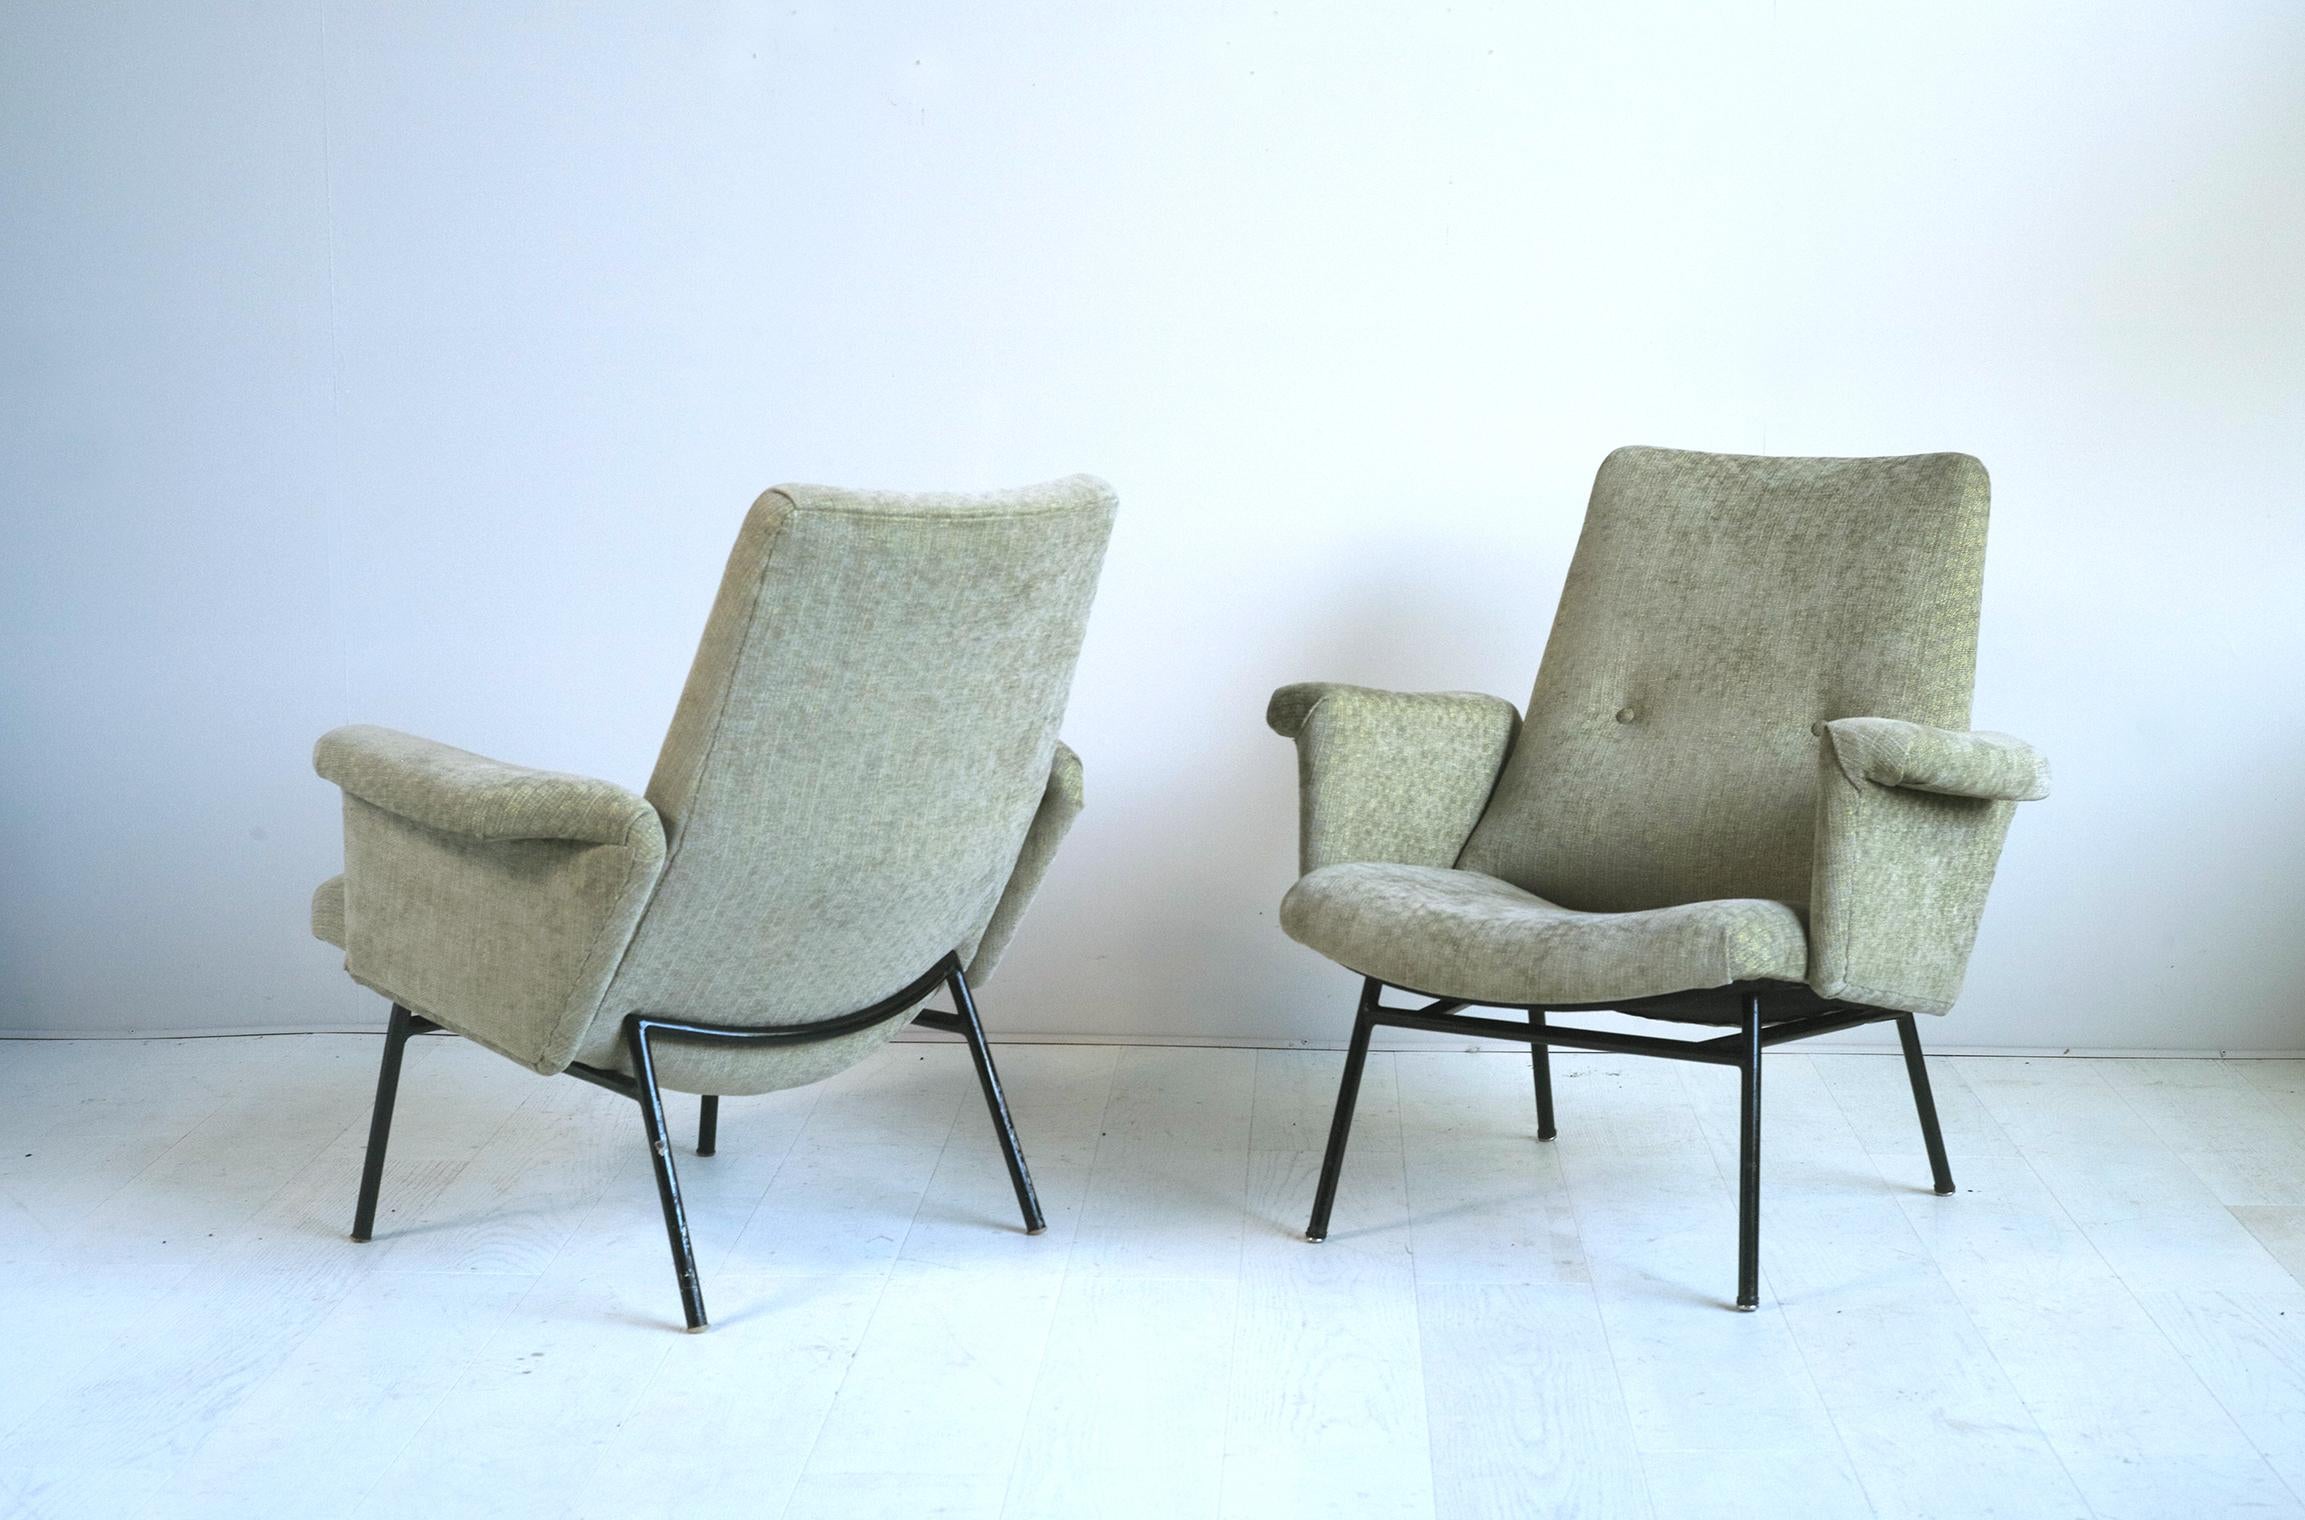 French Pierre Guariche, Pair of Armchairs SK 660, Steiner Edition 1953